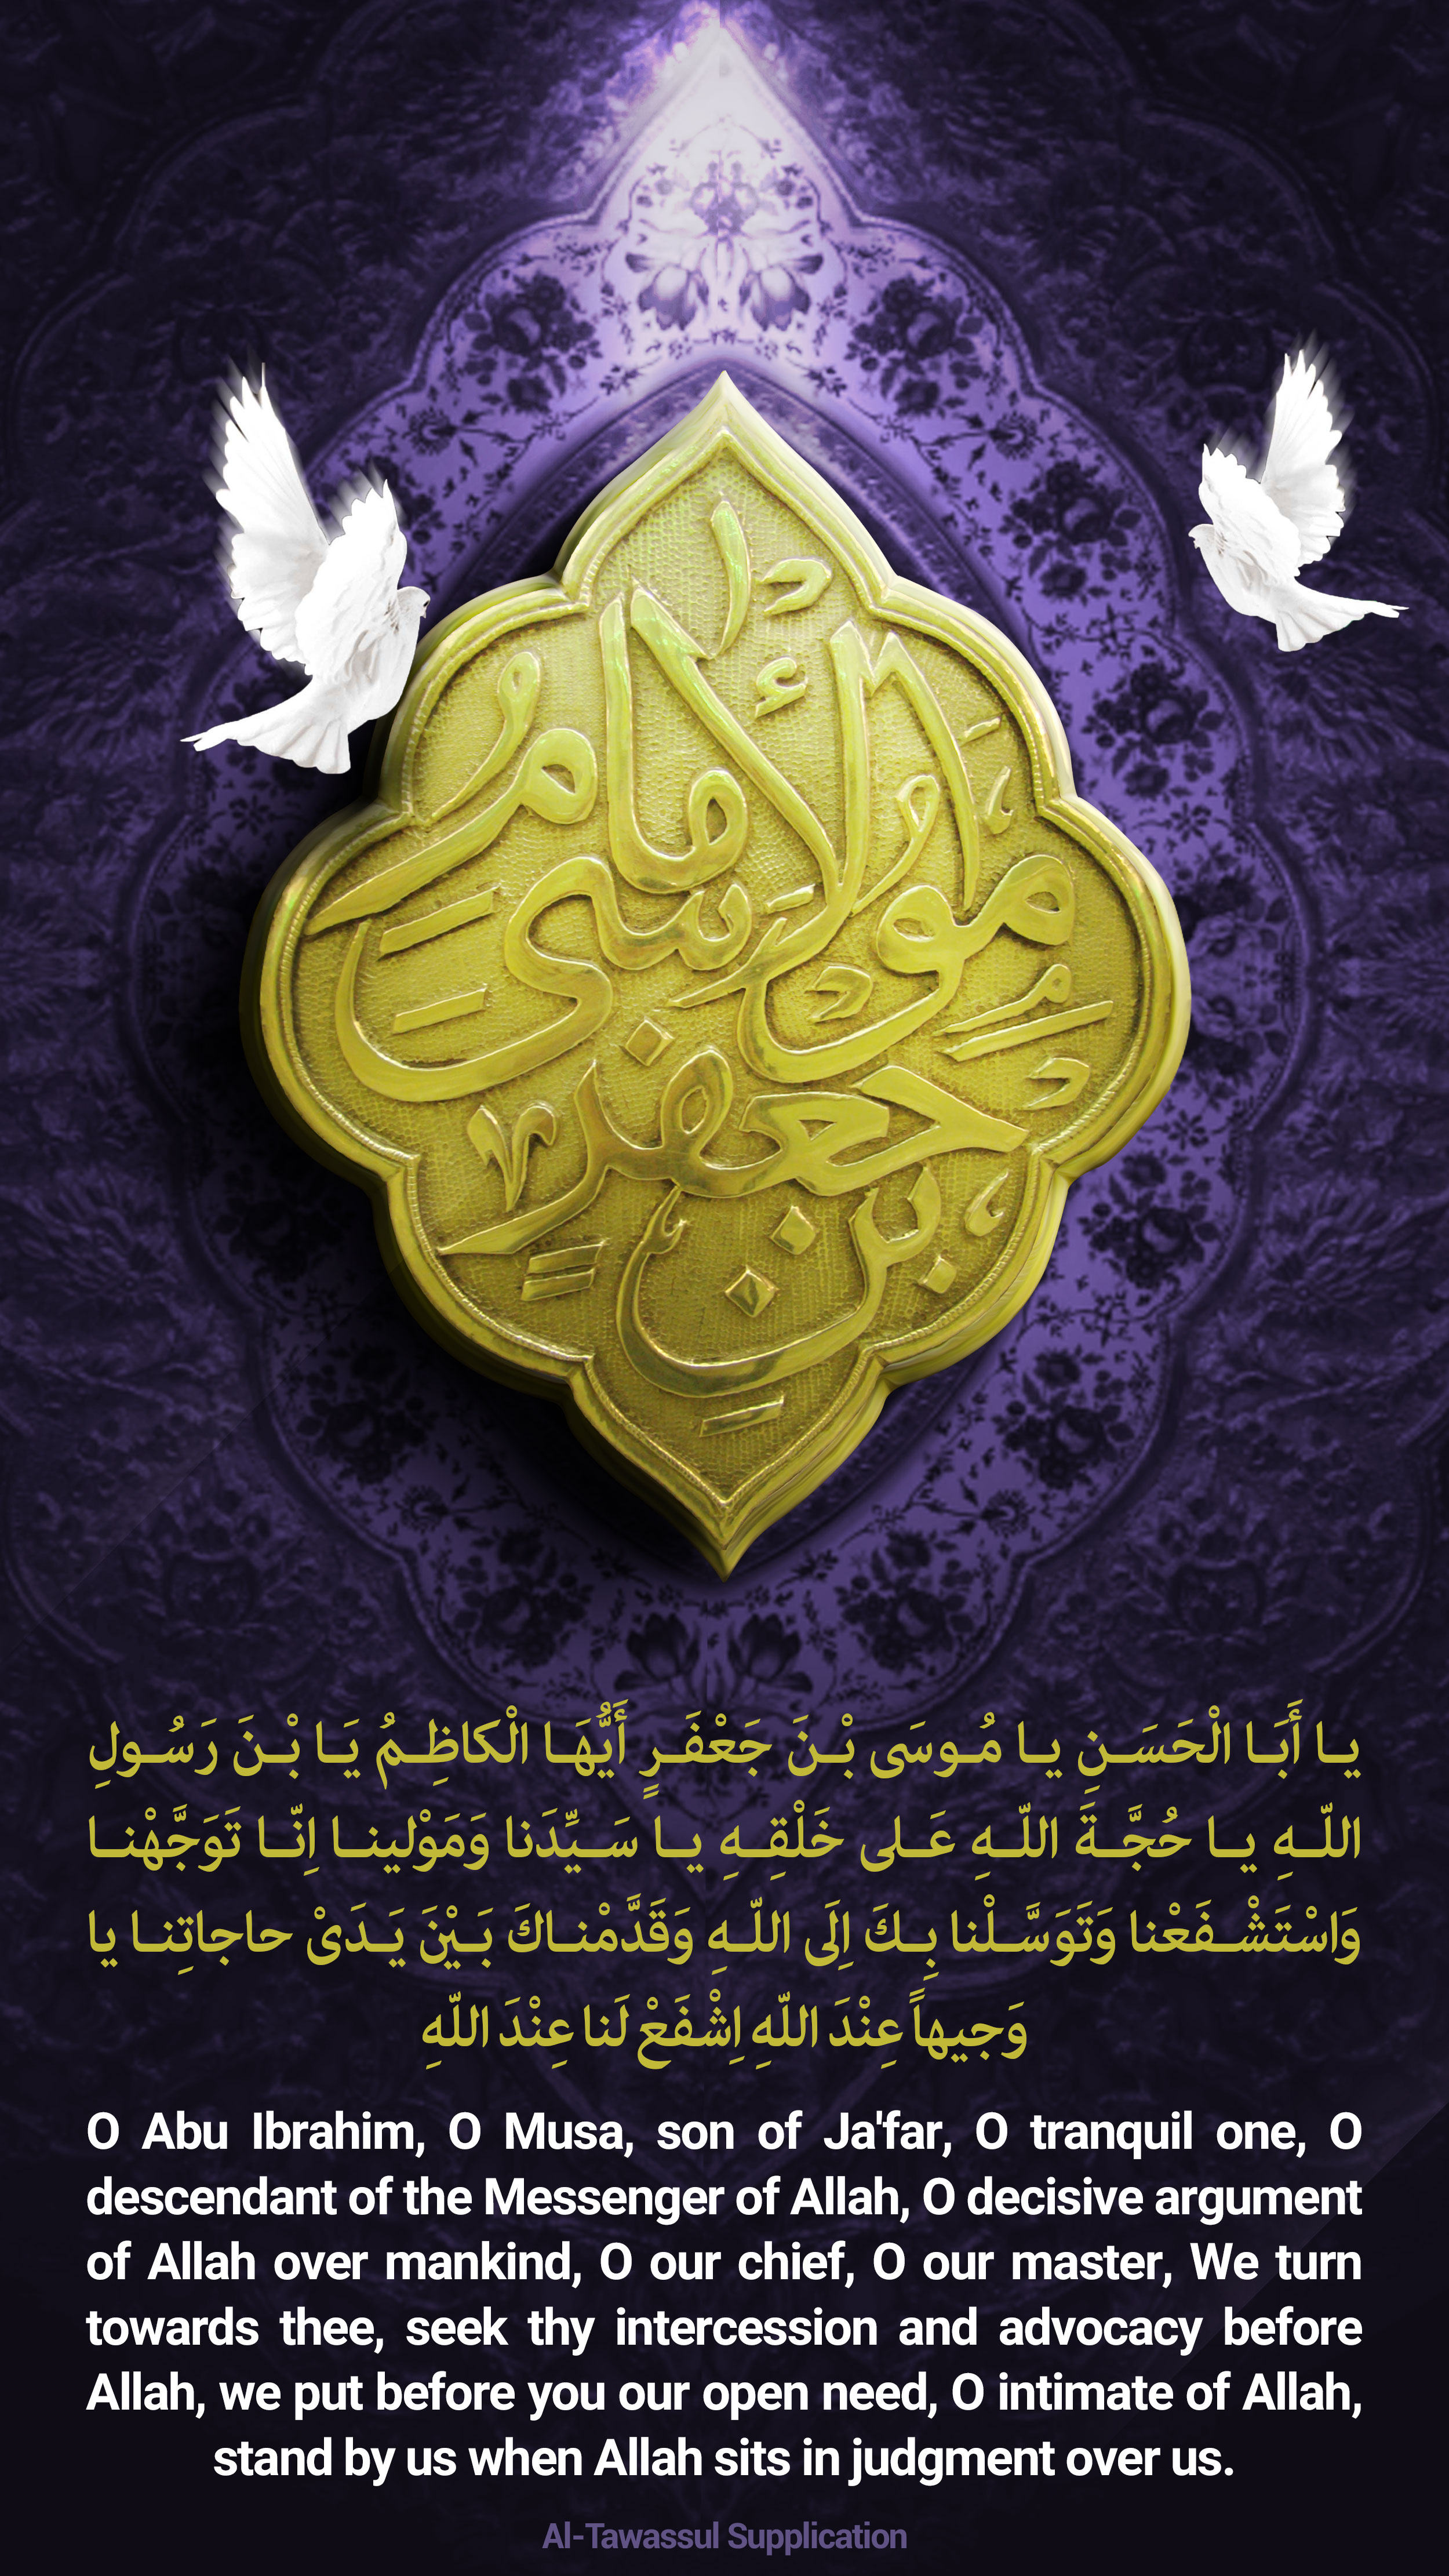 O Musa, son of Ja'far, O intimate of Allah, stand by us when Allah sits in judgment over us.